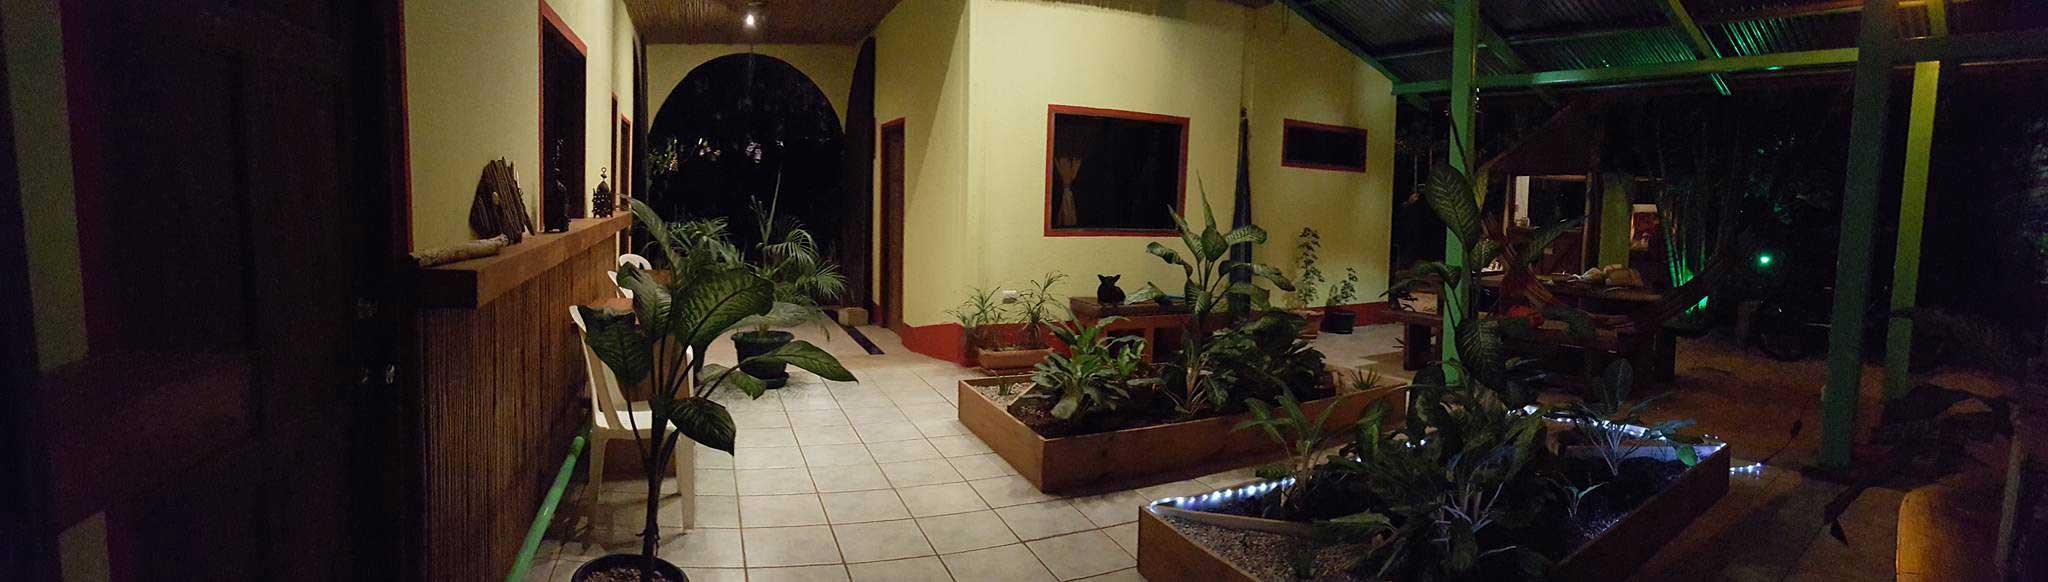 Panorama of indoor gardens and lounge area at night in Indra Inn